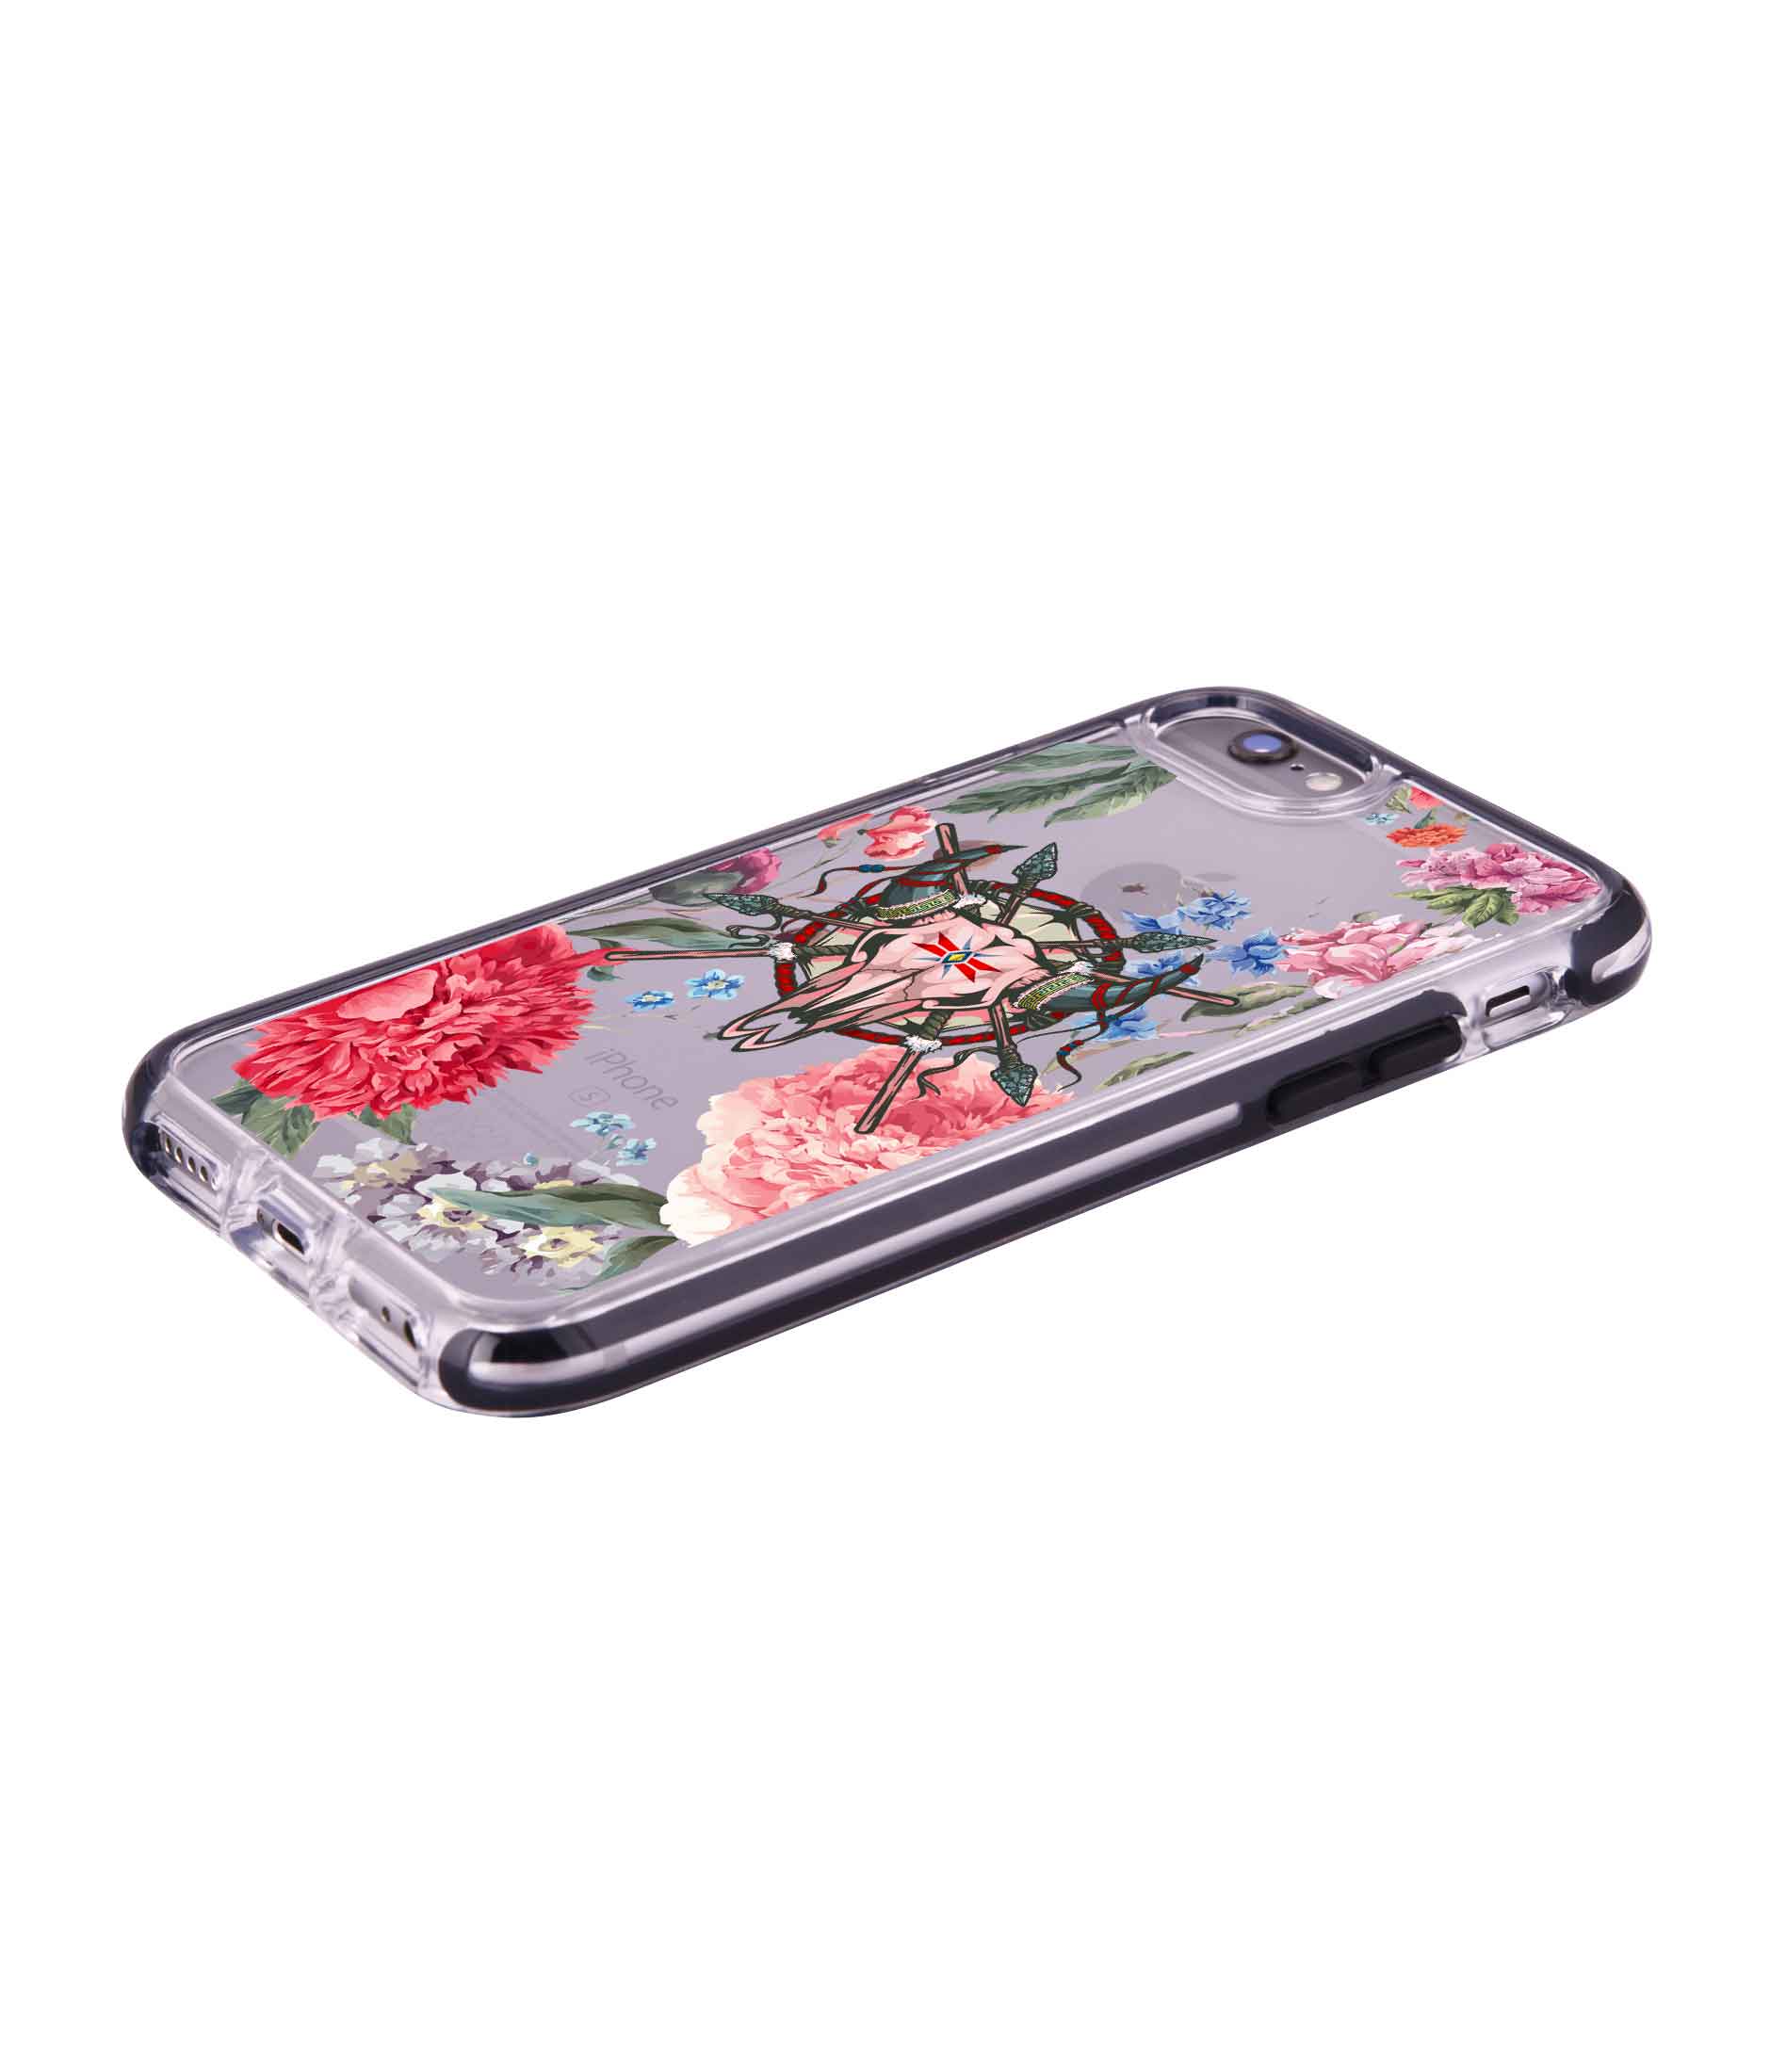 Floral Symmetry - Extreme Phone Case for iPhone 6